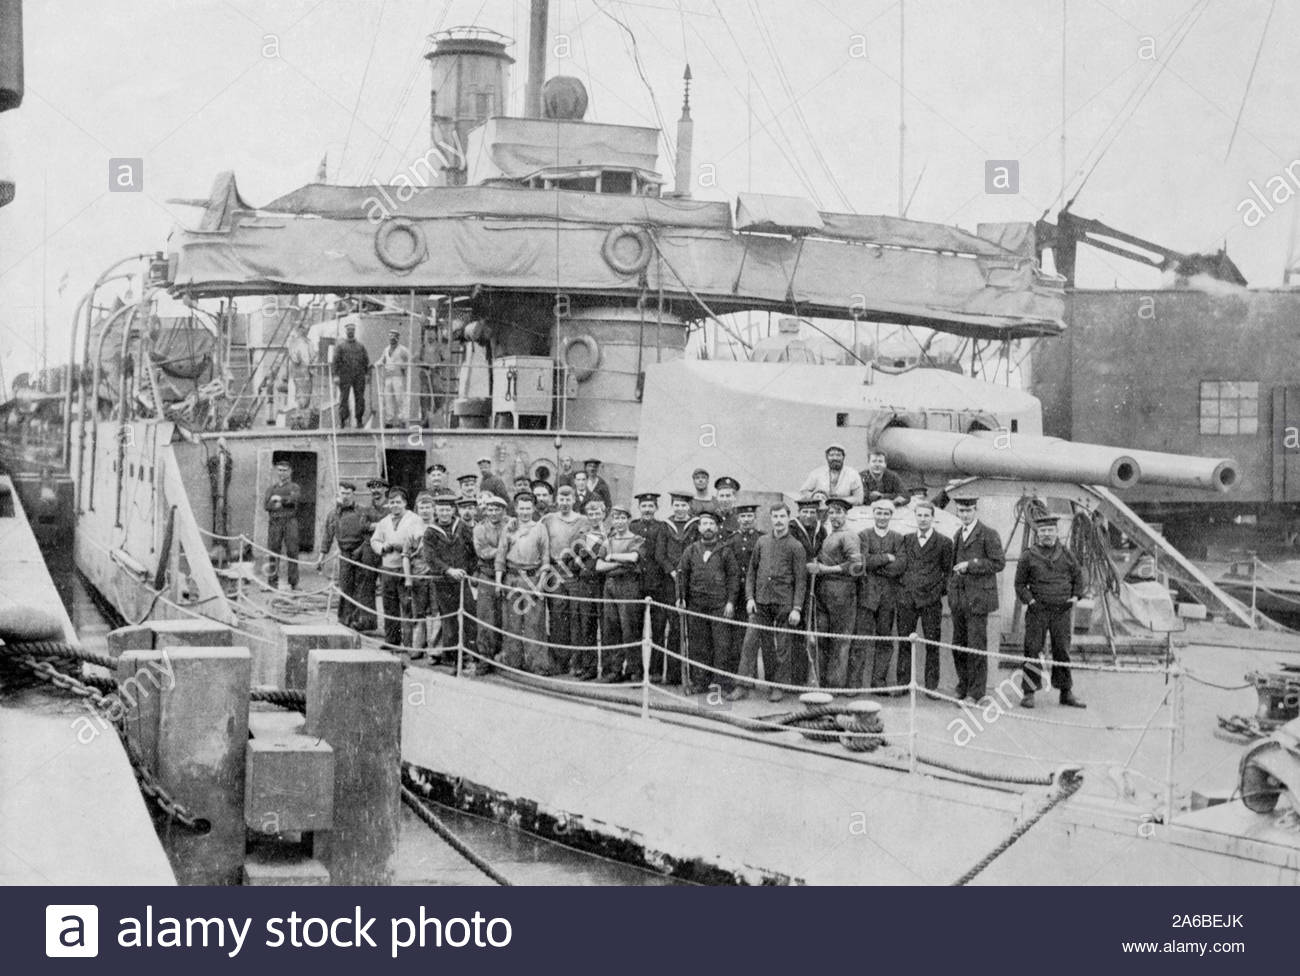 WW1 British Monitor ship, vintage photograph from 1914 Stock Photo